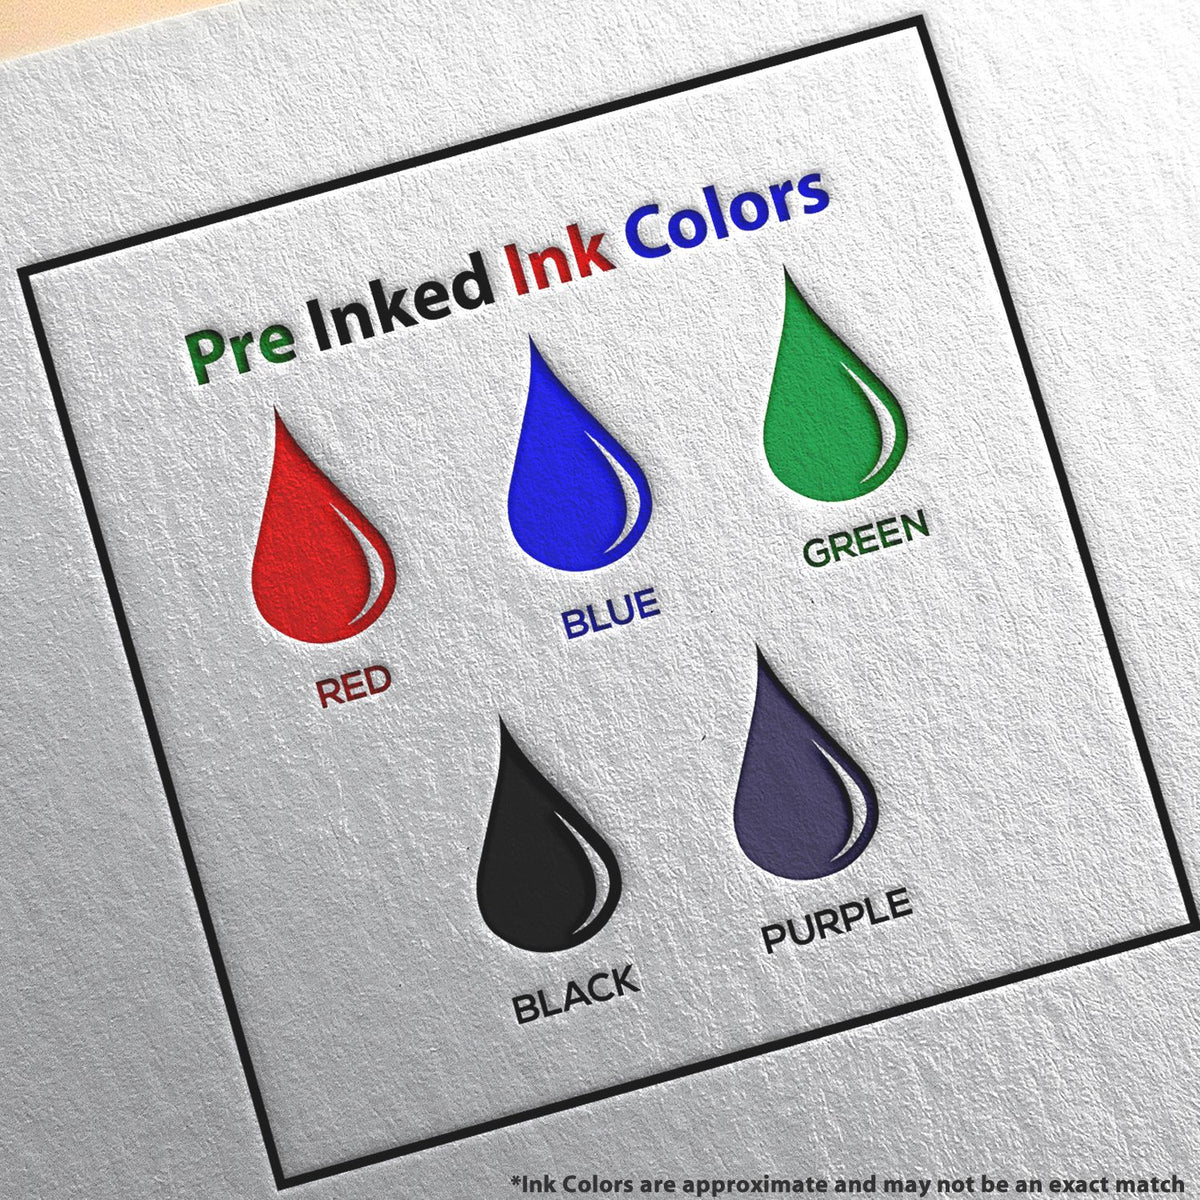 A picture showing the different ink colors or hues available for the MaxLight Premium Pre-Inked Wisconsin State Seal Notarial Stamp product.